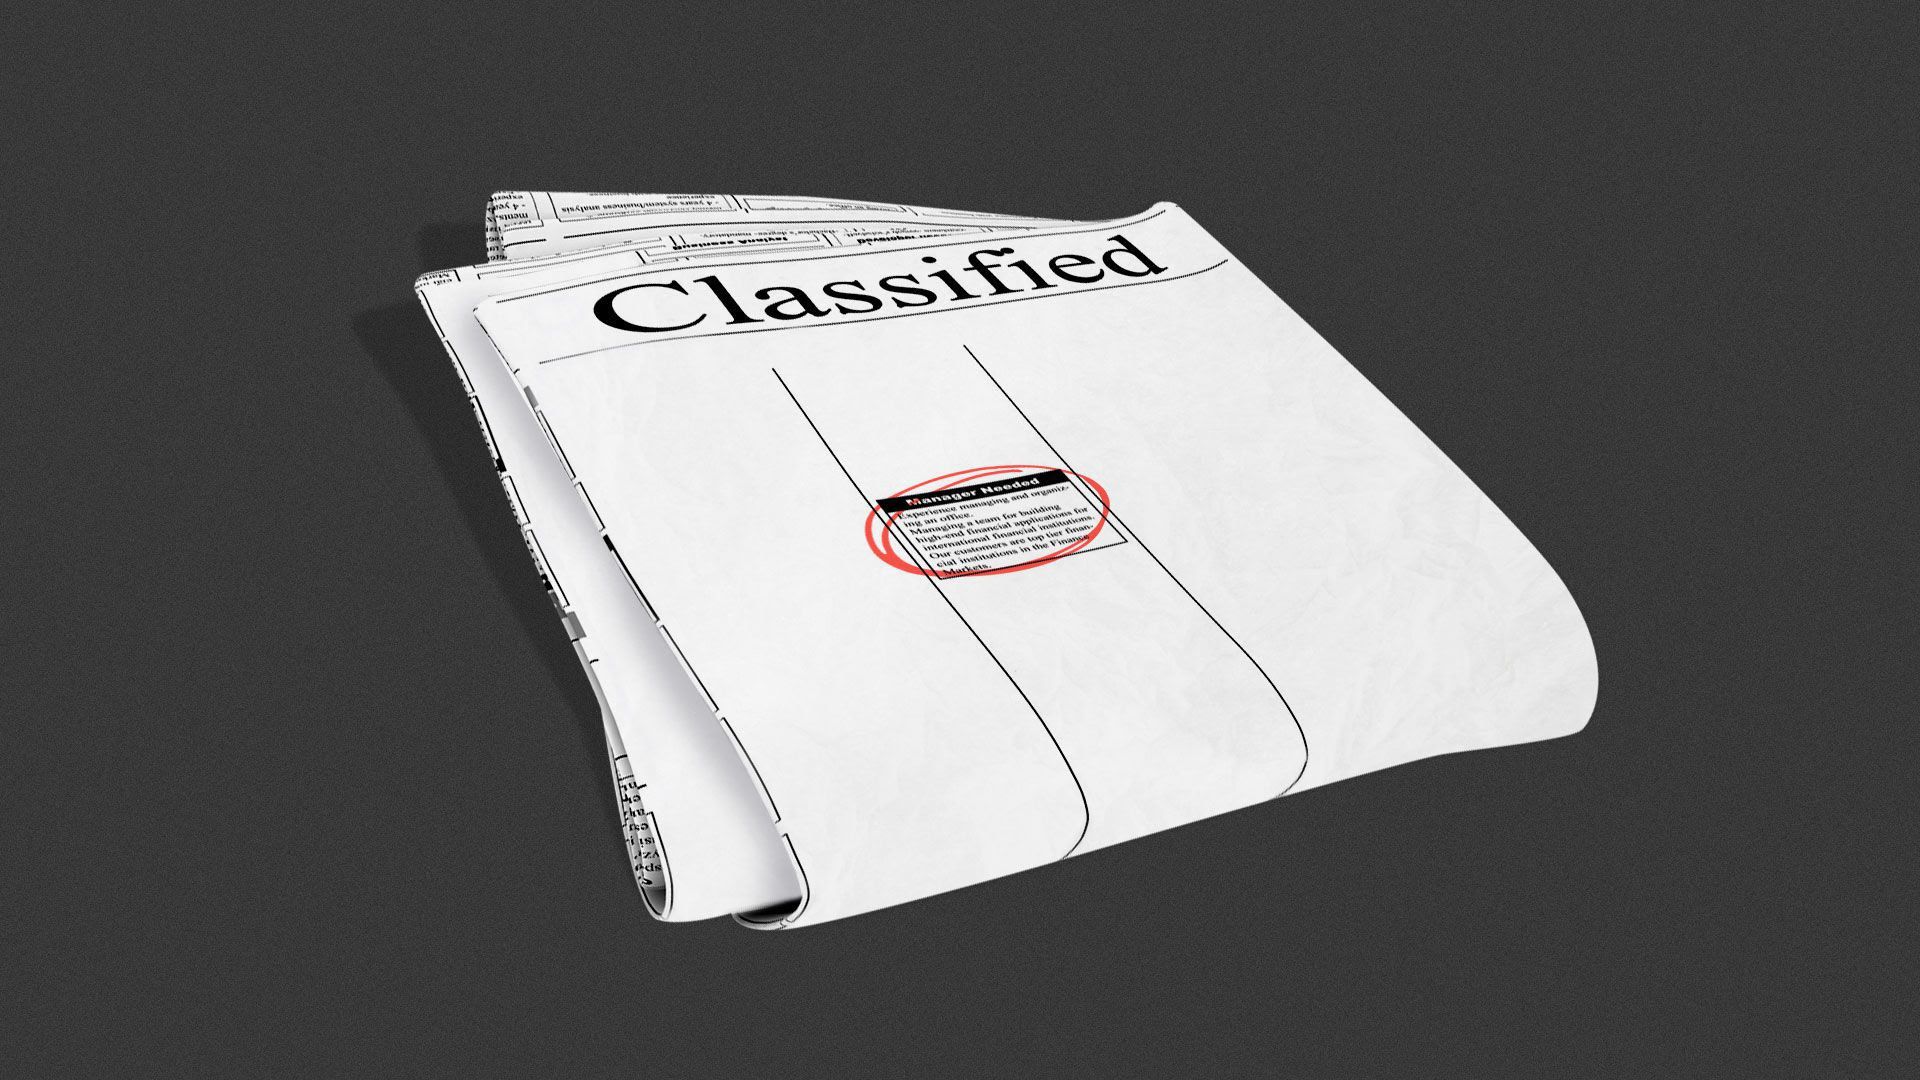 An illustration of empty classified section in a newspaper.